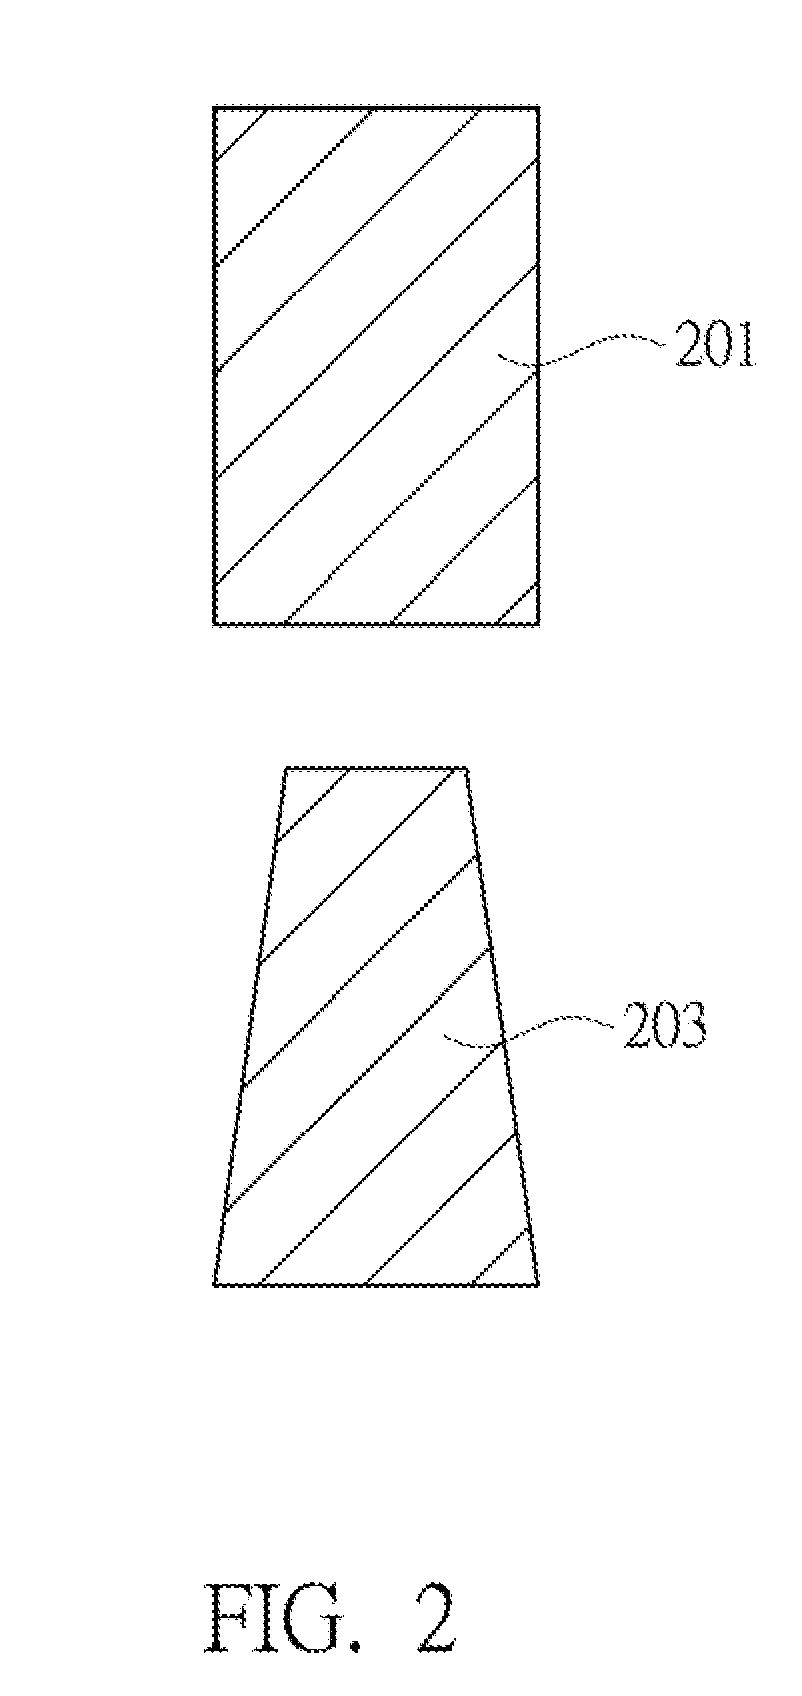 Positive photosensitive resin composition and method for forming pattern by using the same